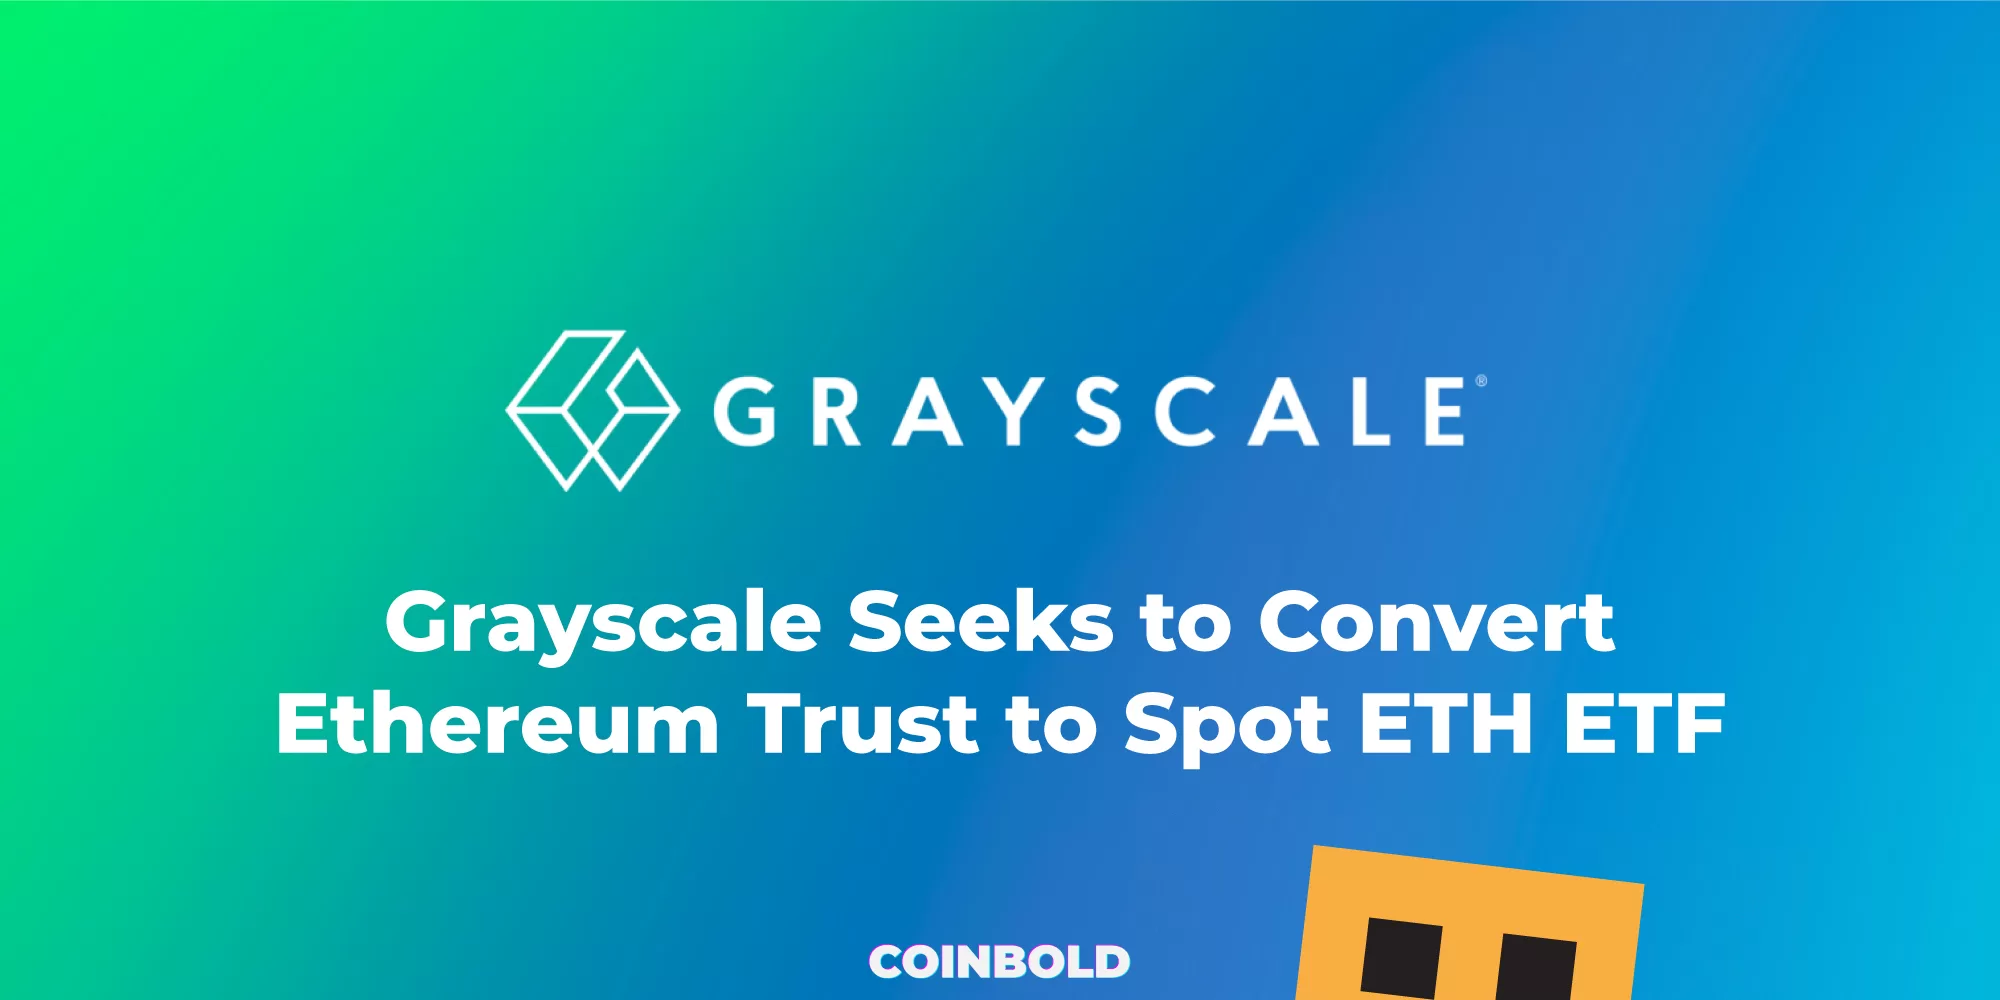 Grayscale Seeks to Convert Ethereum Trust to Spot ETH ETF